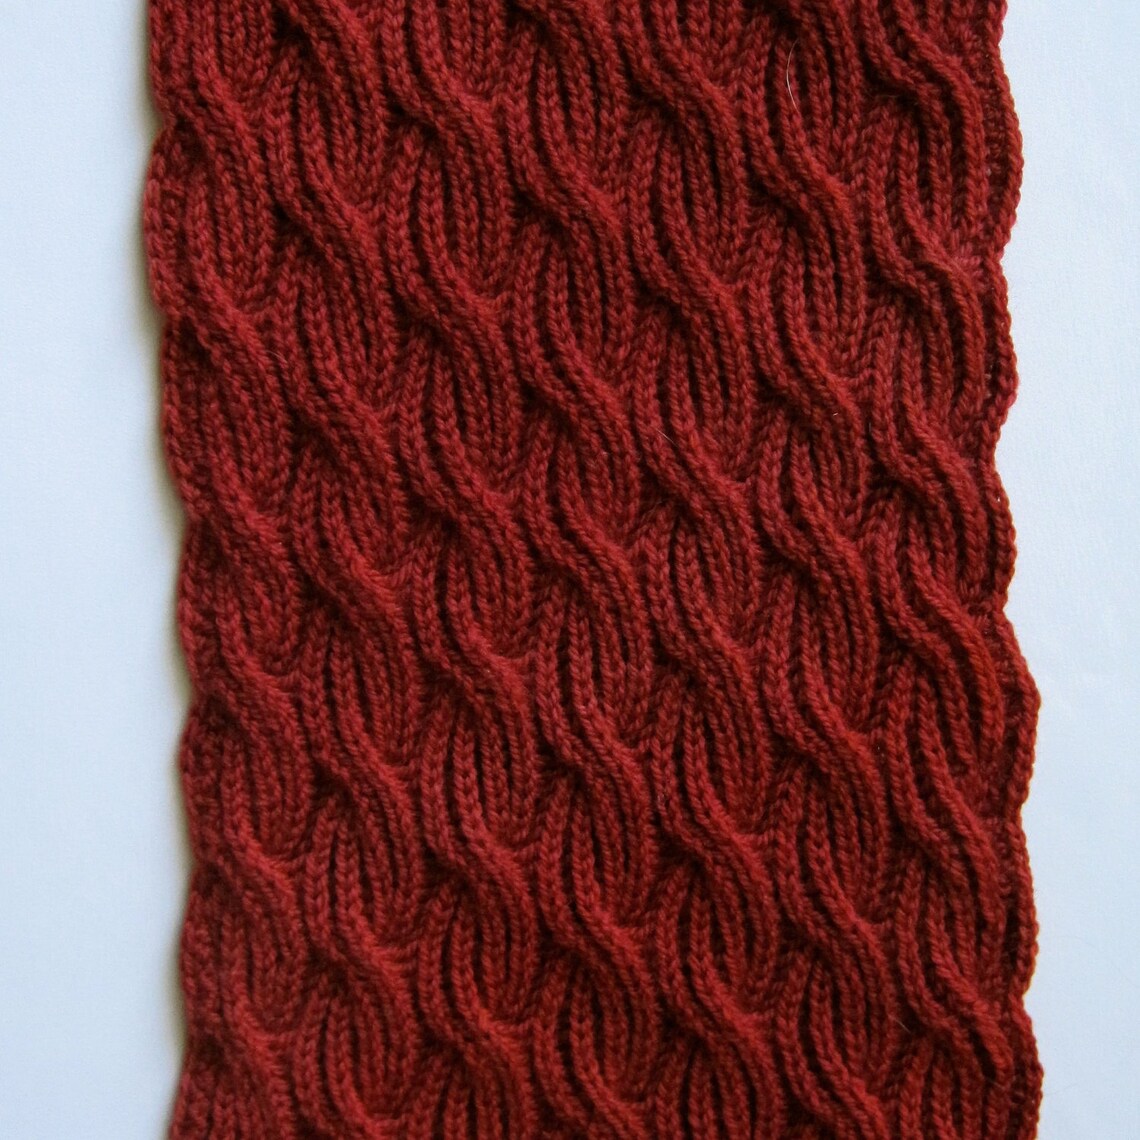 Knit Scarf Pattern: Brioche Cabled Turtleneck Scarf Knitting - Etsy